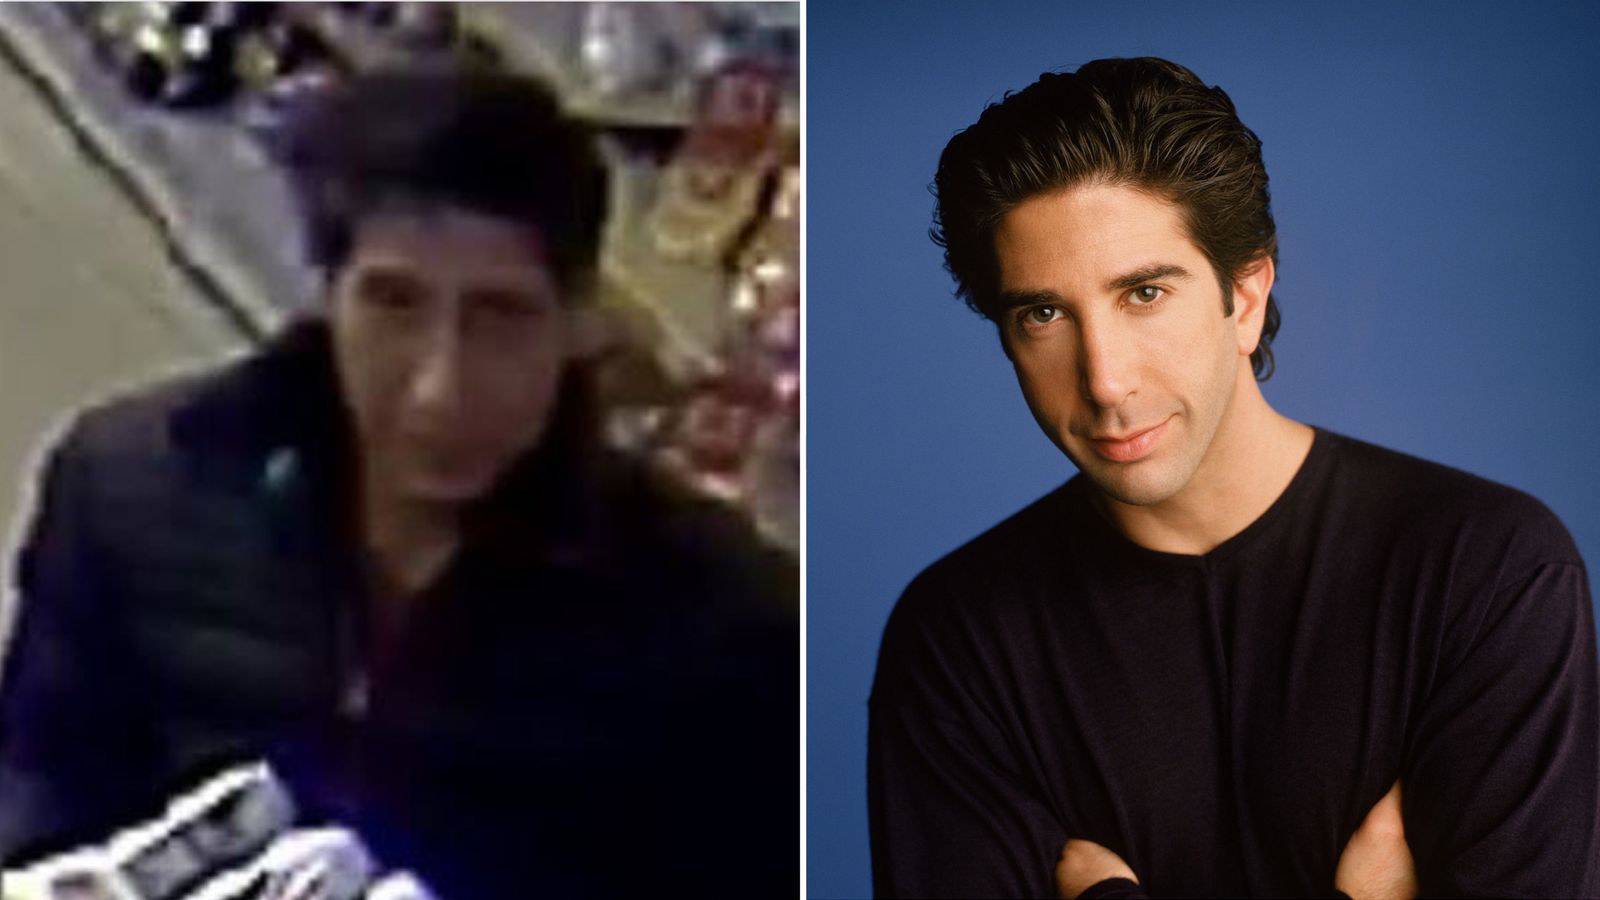 Police In Blackpool Hunt For Suspect Who Looks Like Ross Geller From Friends 6842